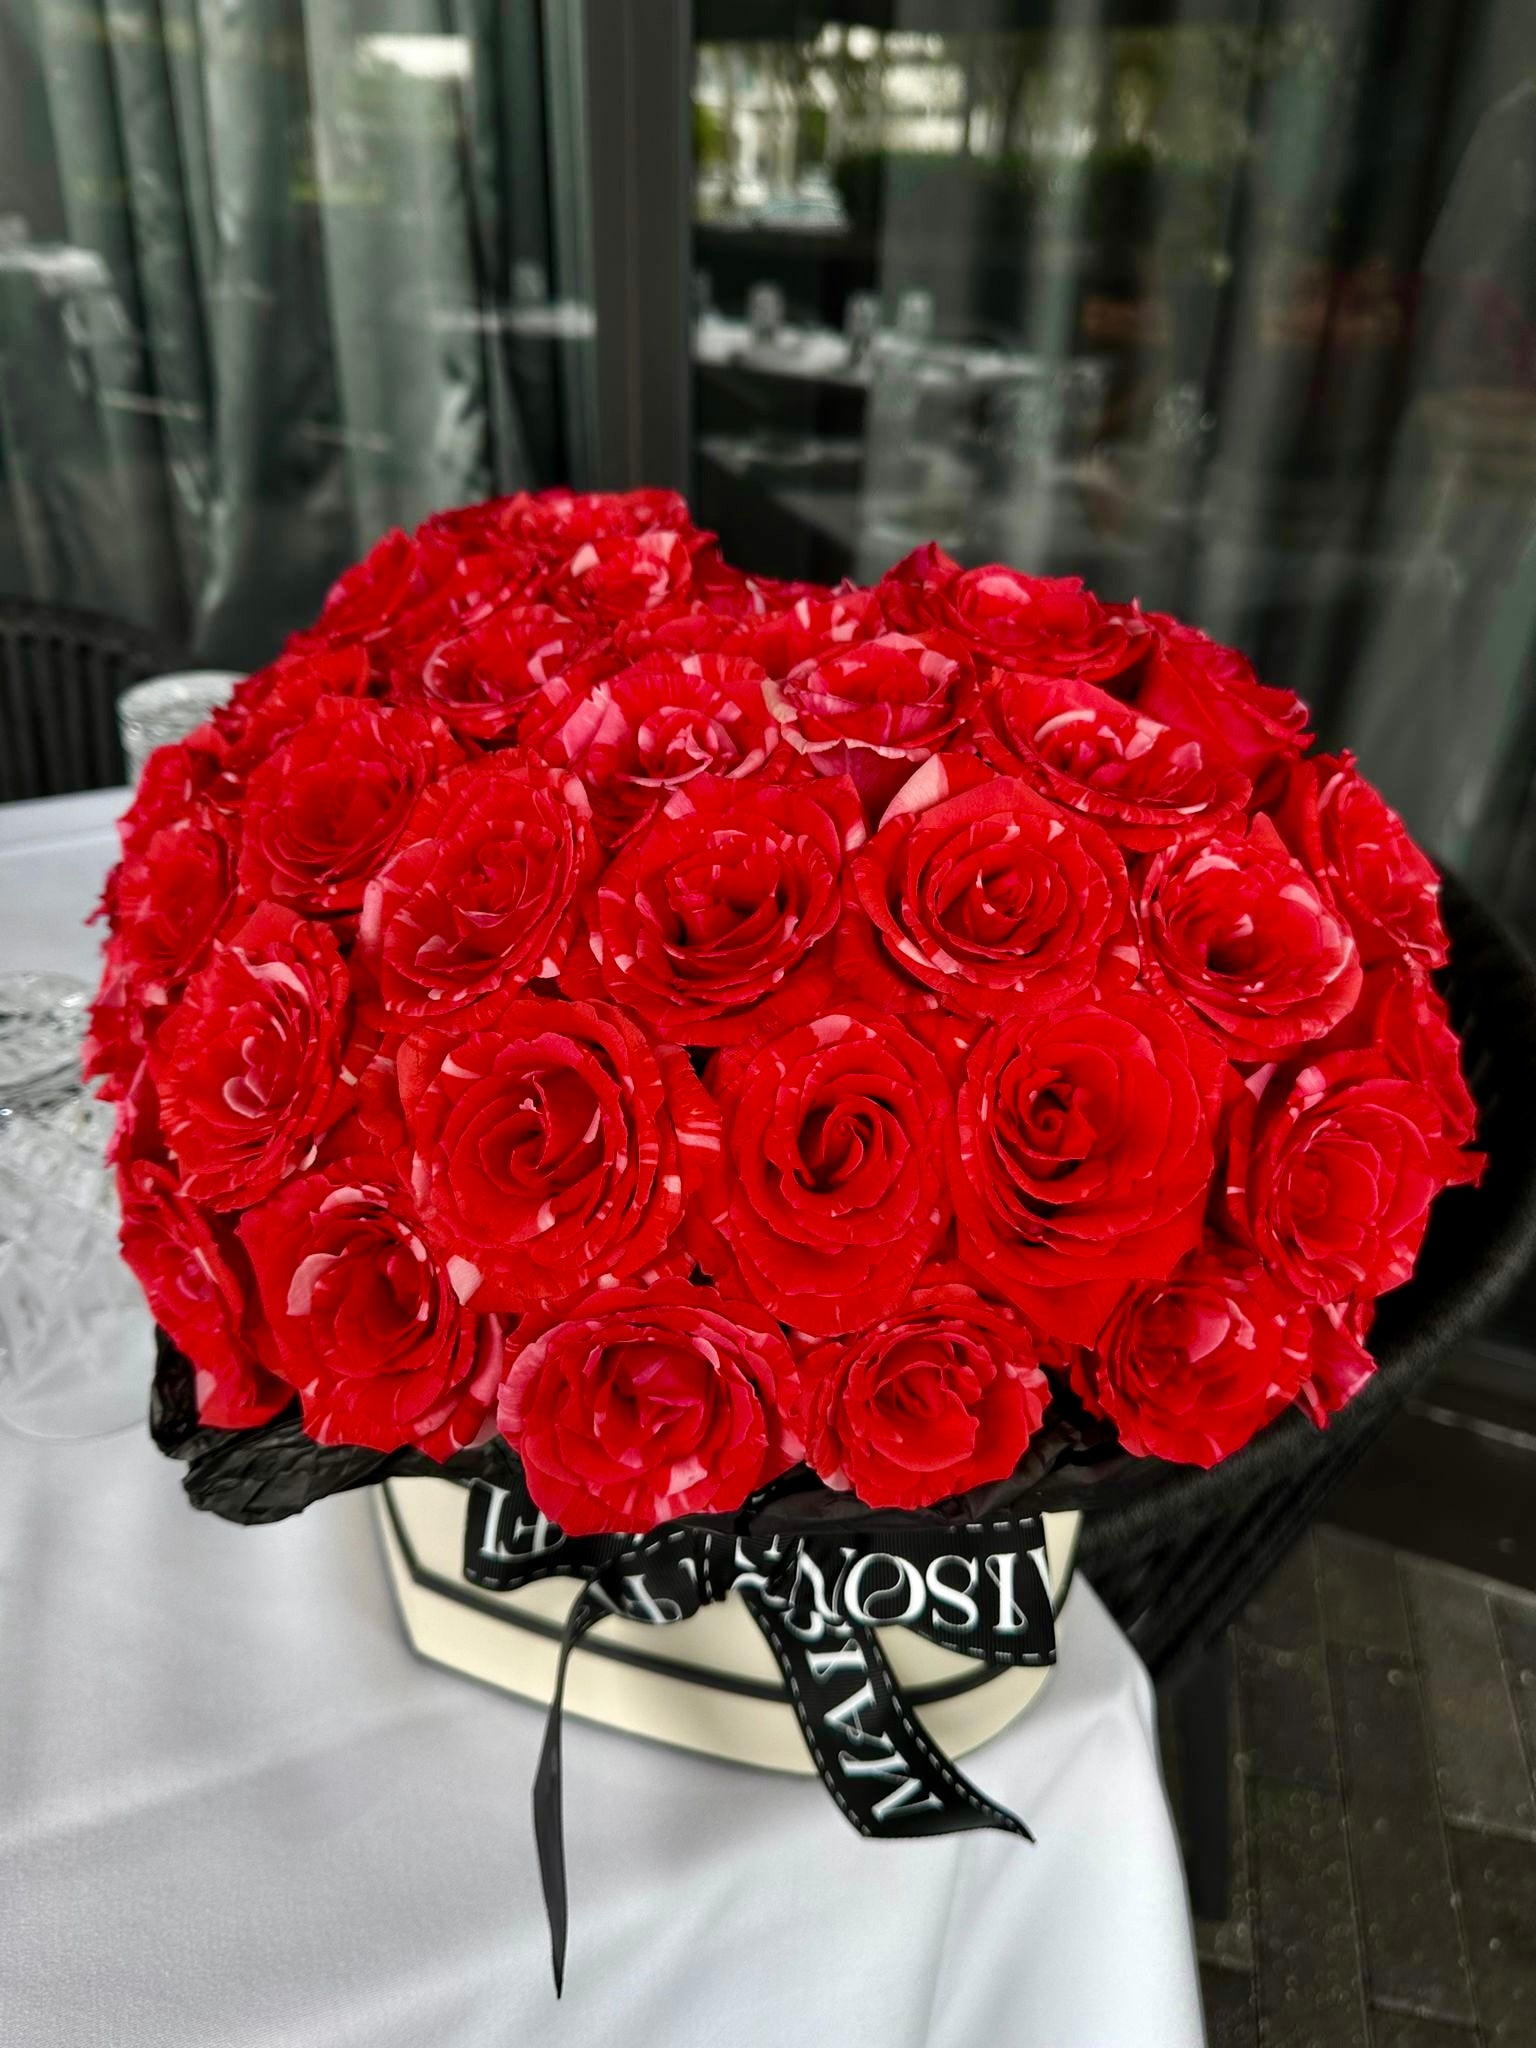 All of my heart - Heart Shaped box arrangement filled with Long stem premium roses(Red wildcat color)